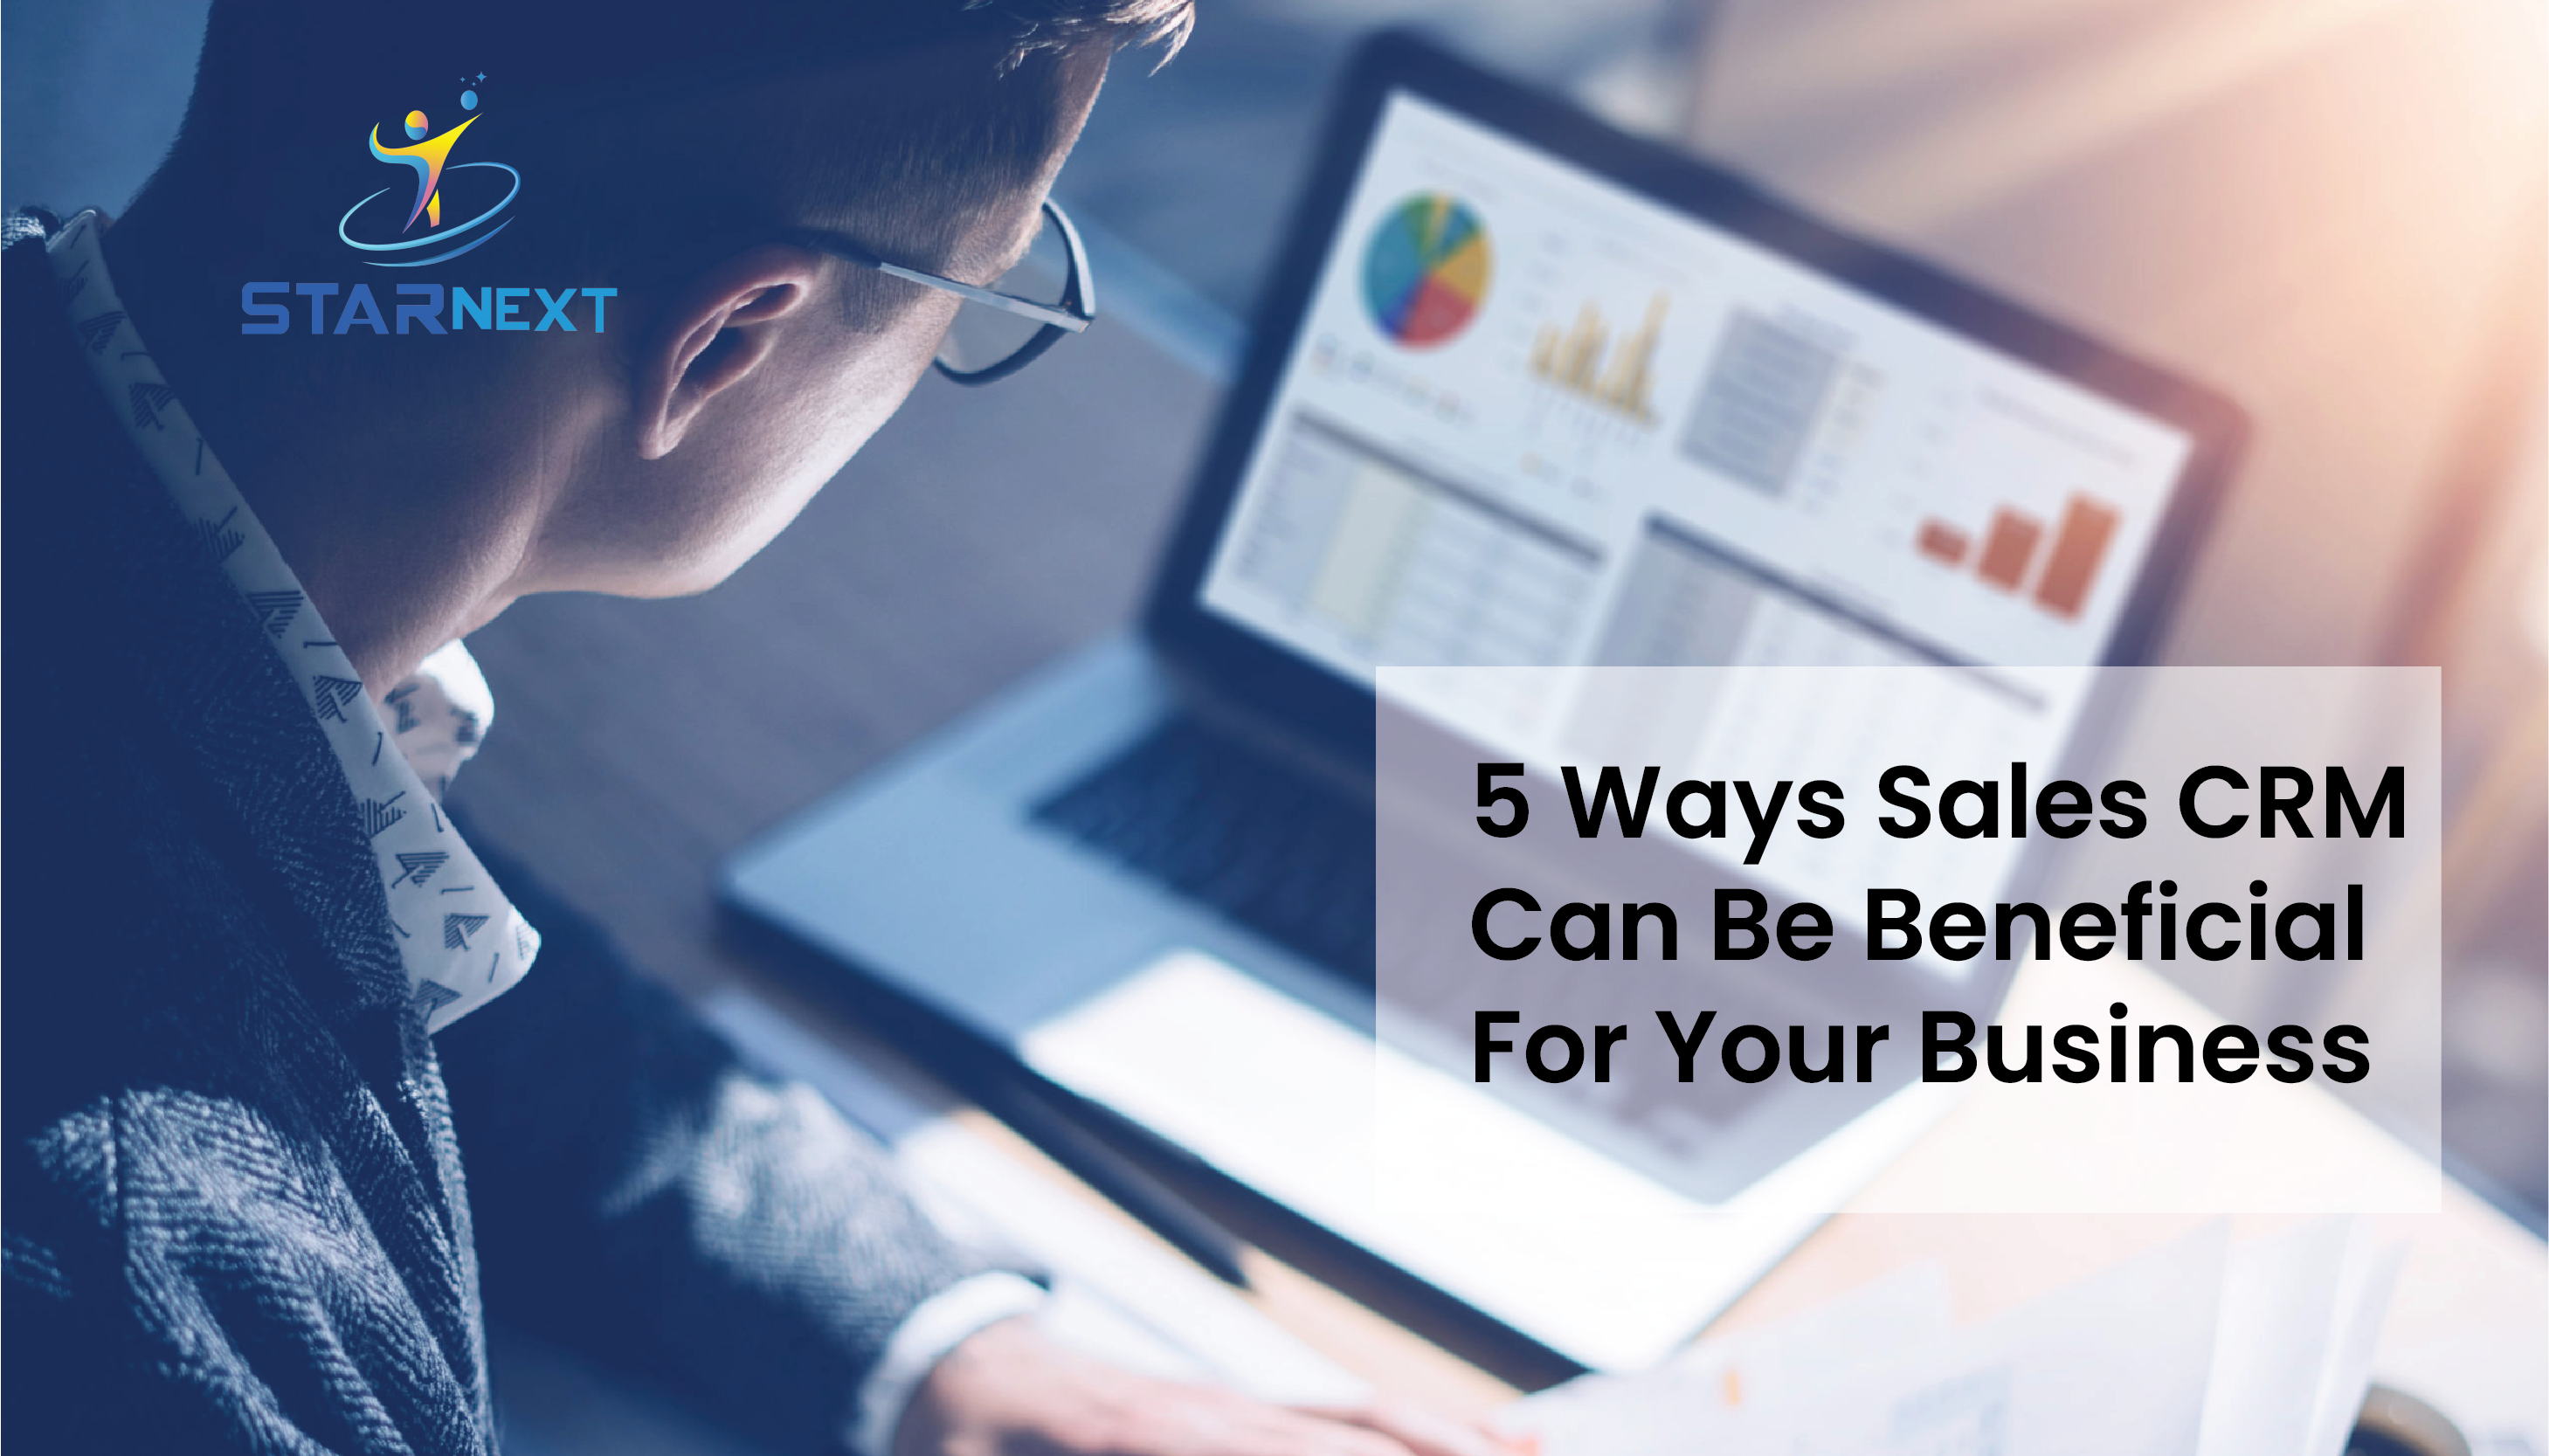 5 Ways Sales CRM Can Be Beneficial For Your Business